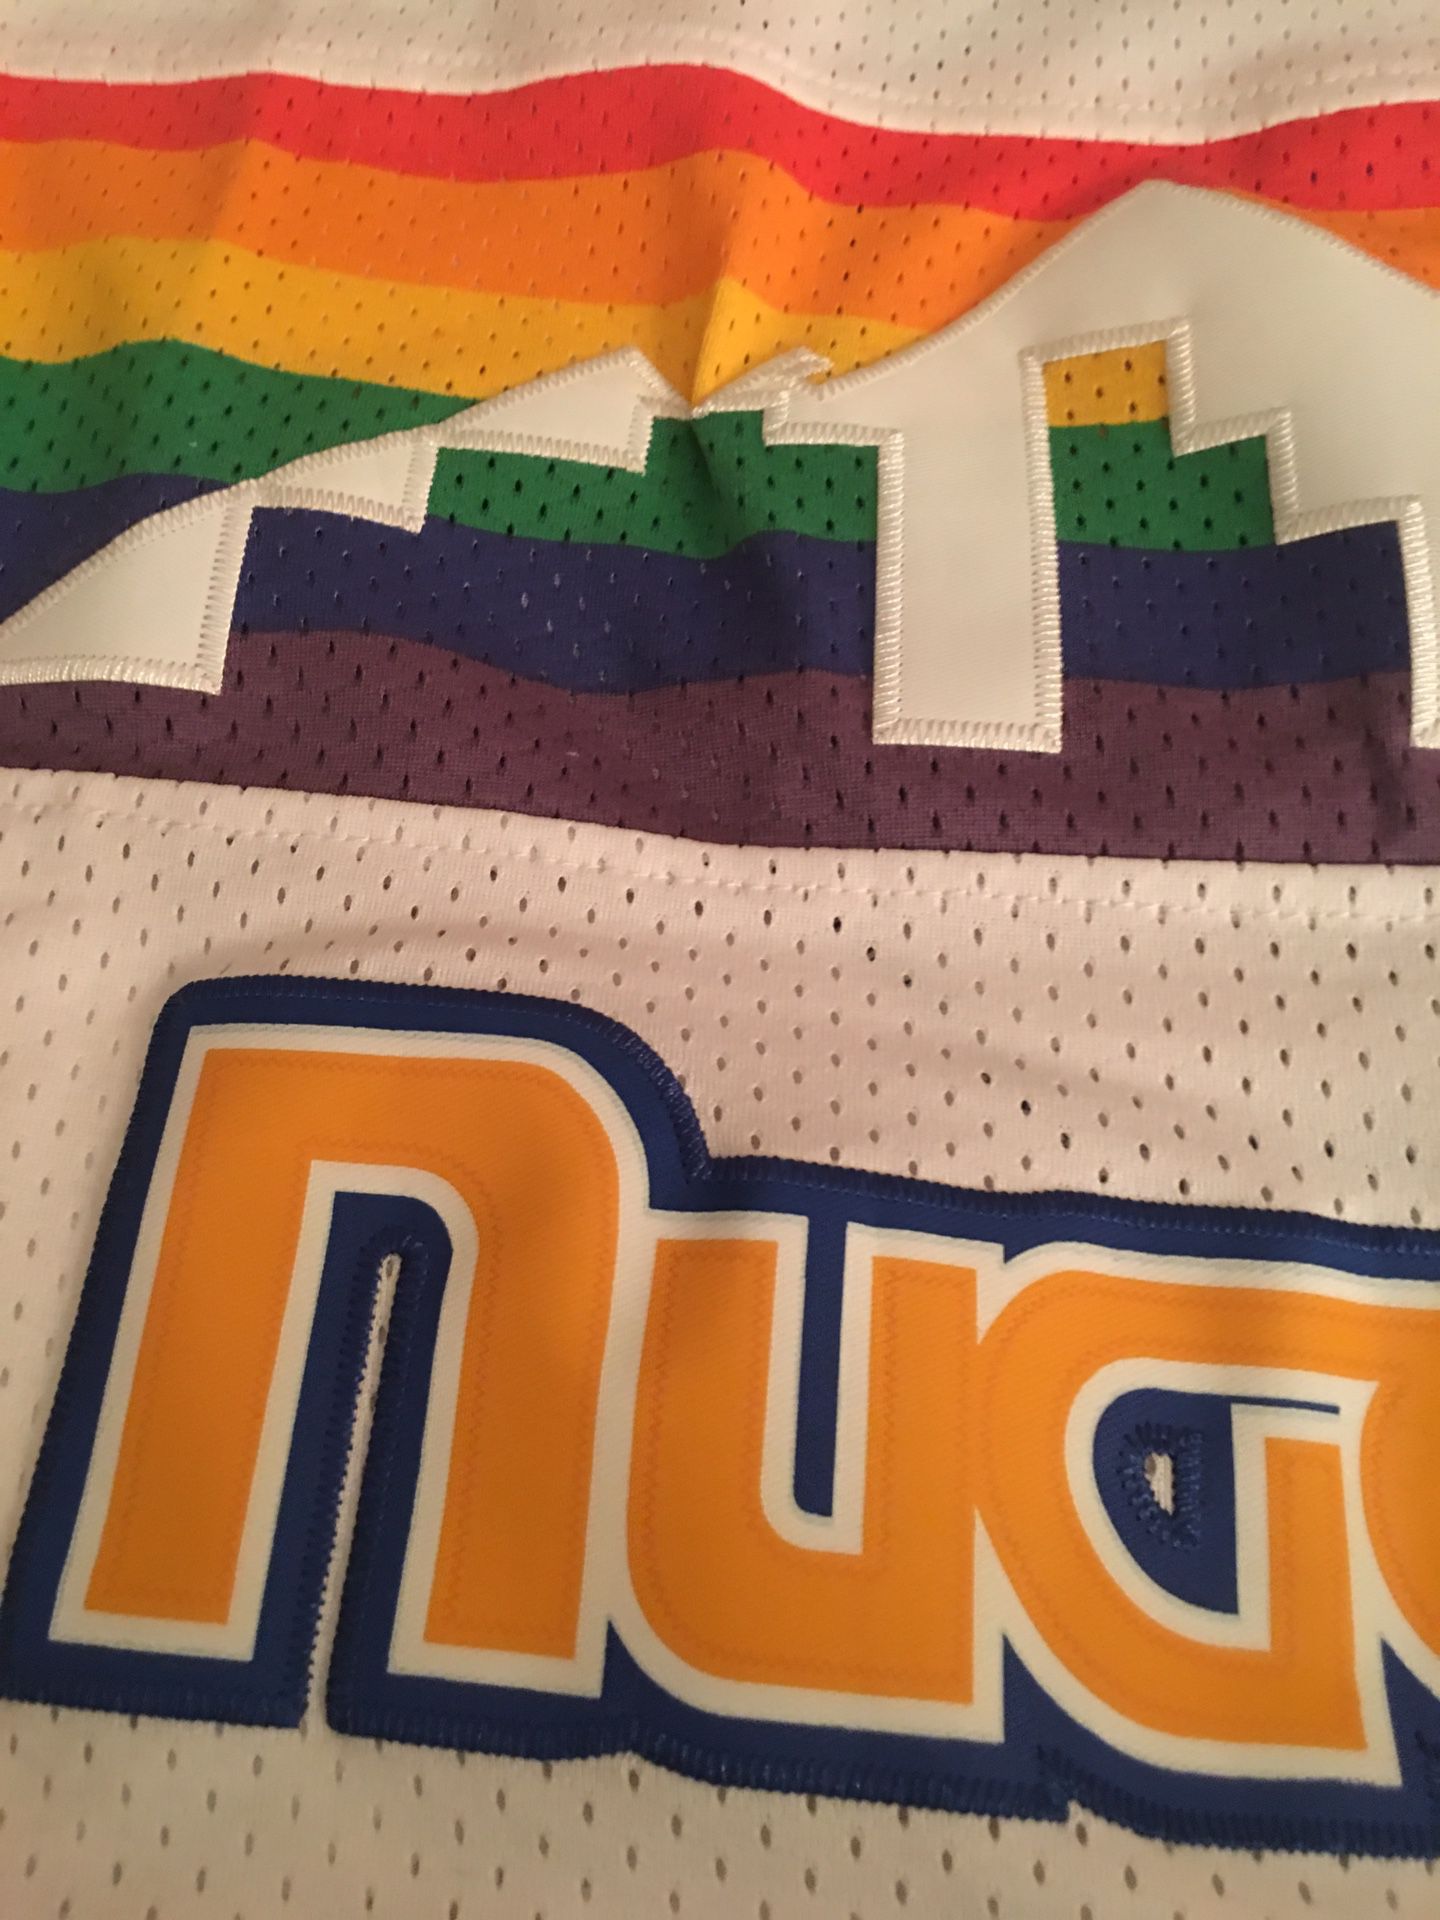 Mitchell & Ness Hardwood Classics Youth Boys NBA Denver Nuggets Allen  Iverson Basketball Jersey XL for Sale in Sarasota, FL - OfferUp